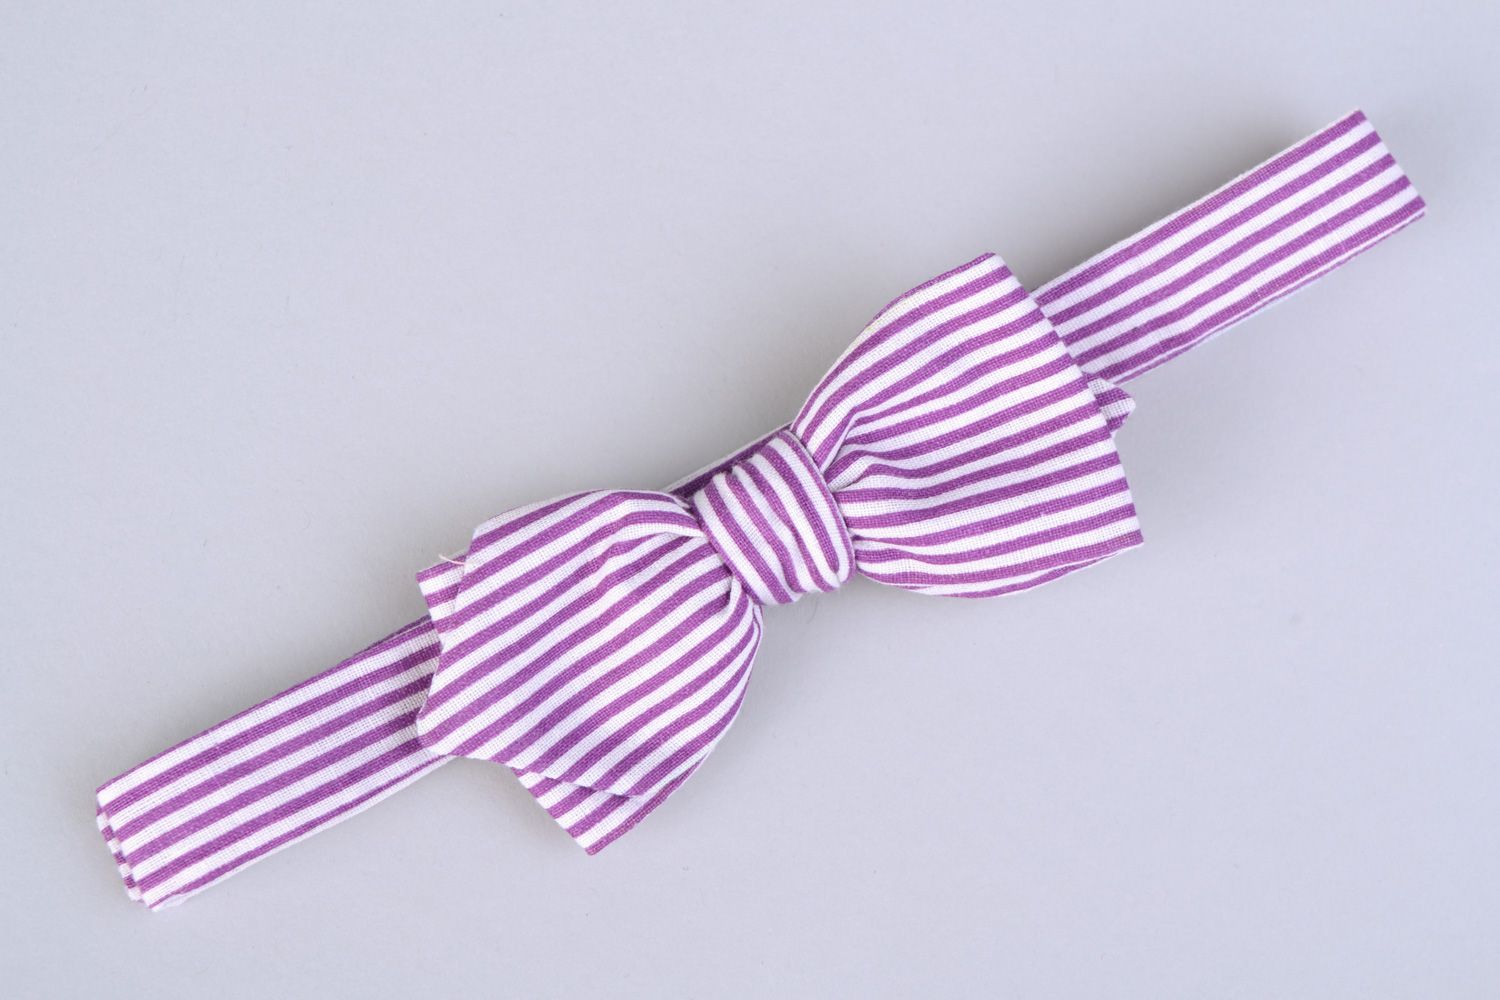 Handmade designer bow tie sewn of striped white and violet cotton fabric for men photo 3